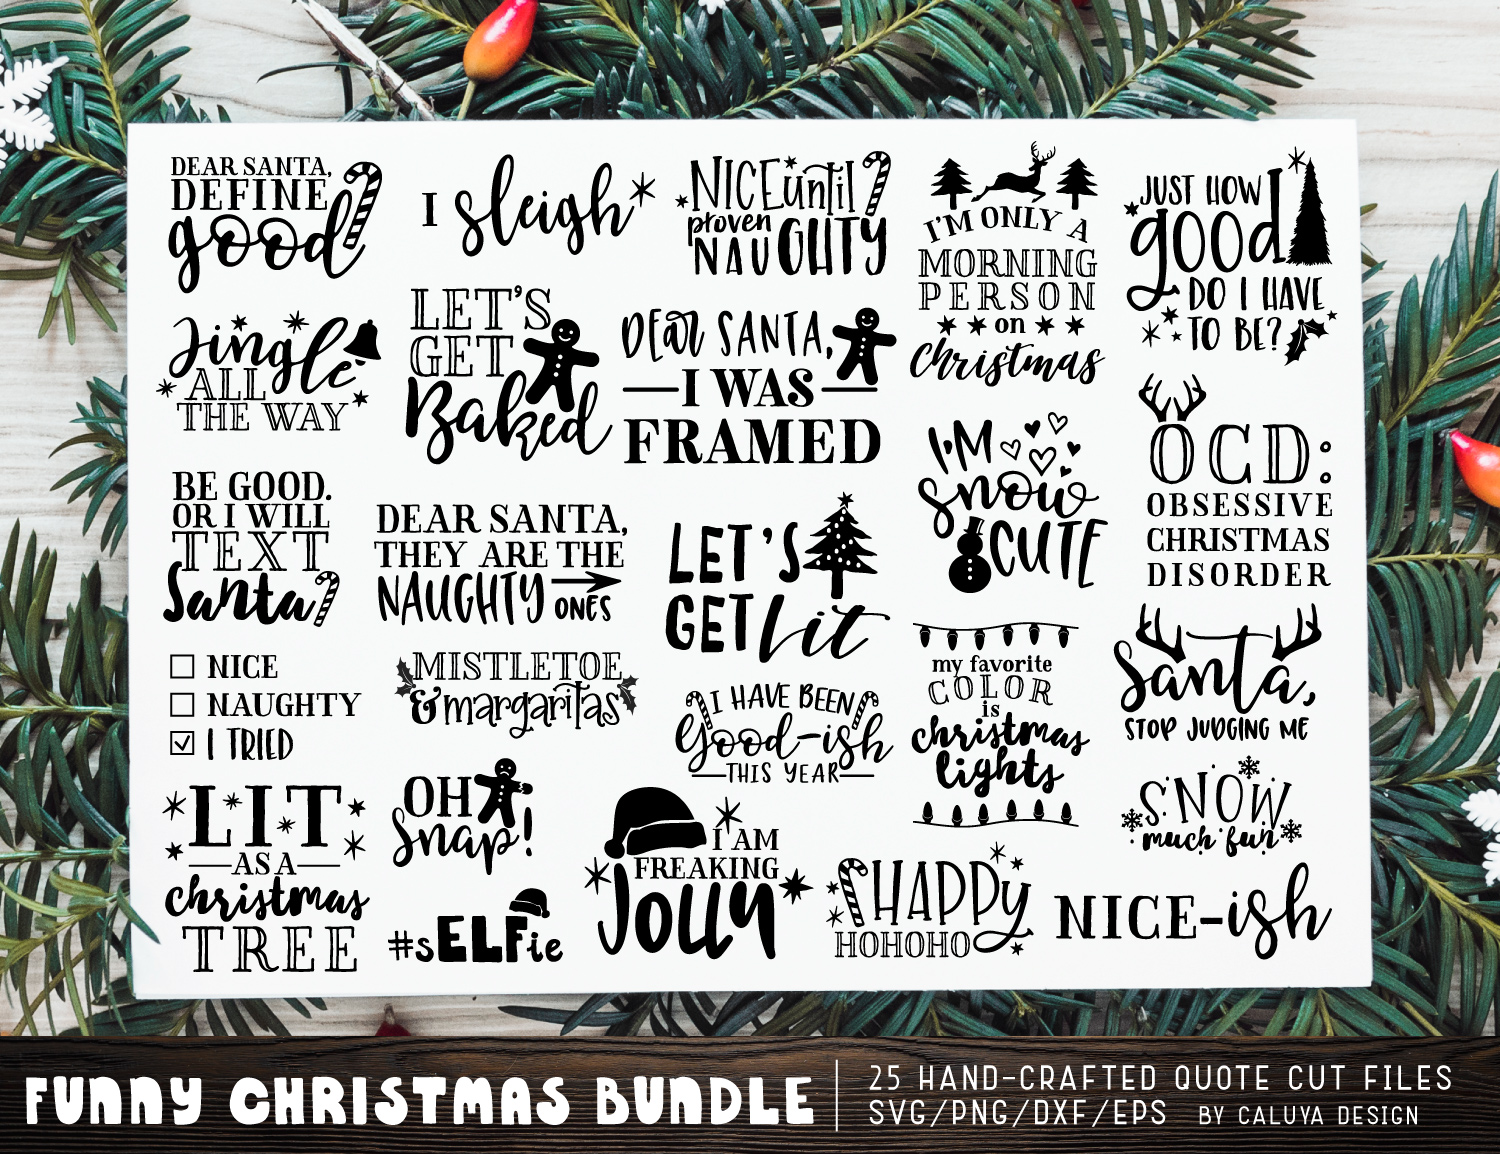 This file is included in our WEEKLY $3 Christmas Quote Bundle 